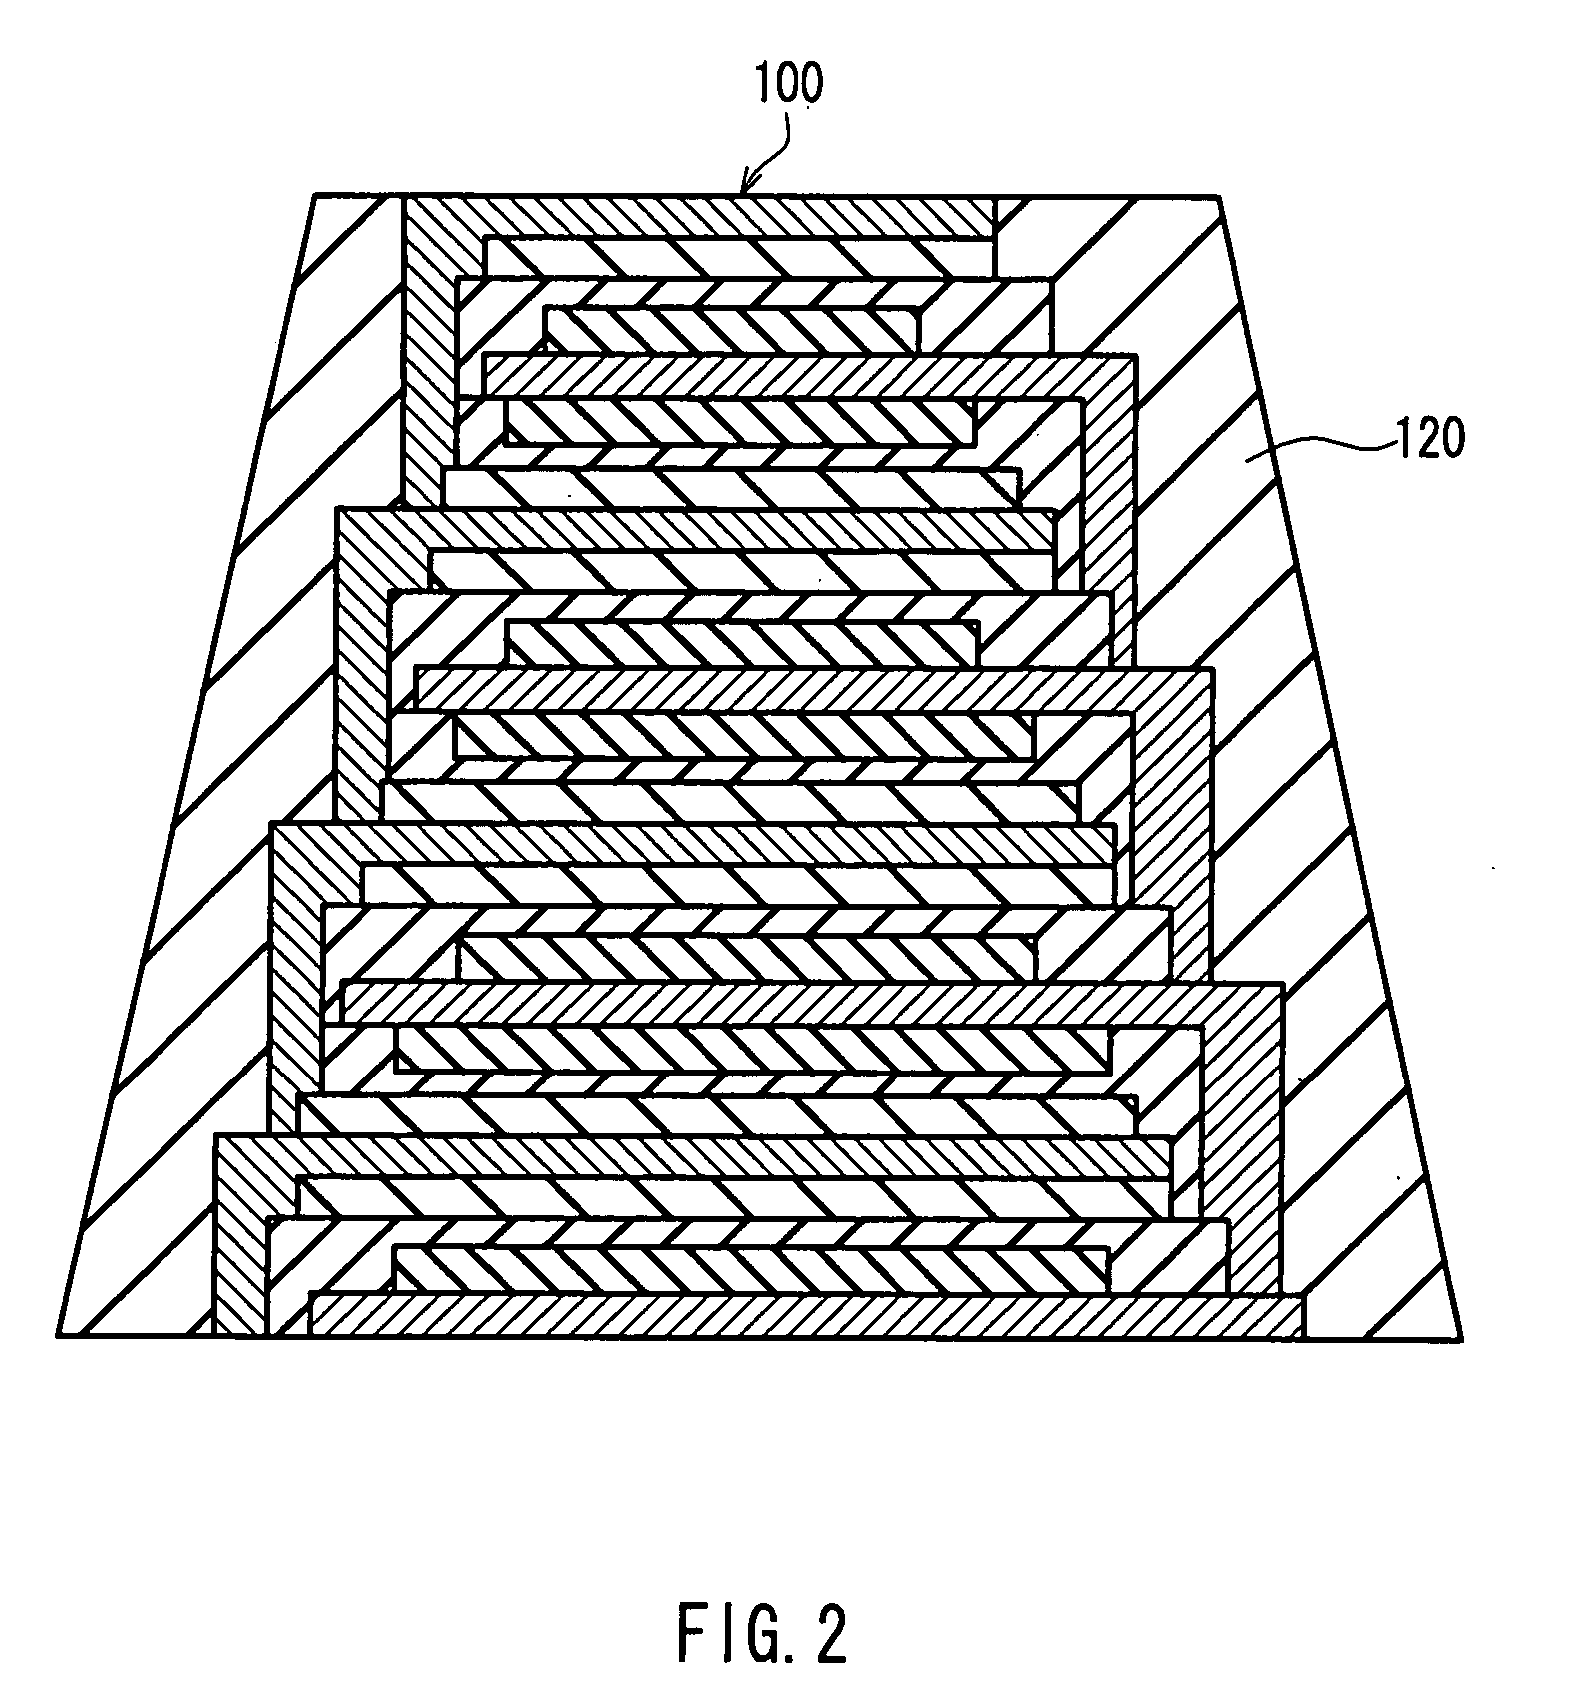 Thin-film laminated body, thin-film cell, capacitor, and method and equipment for manufacturing thin-film laminated body